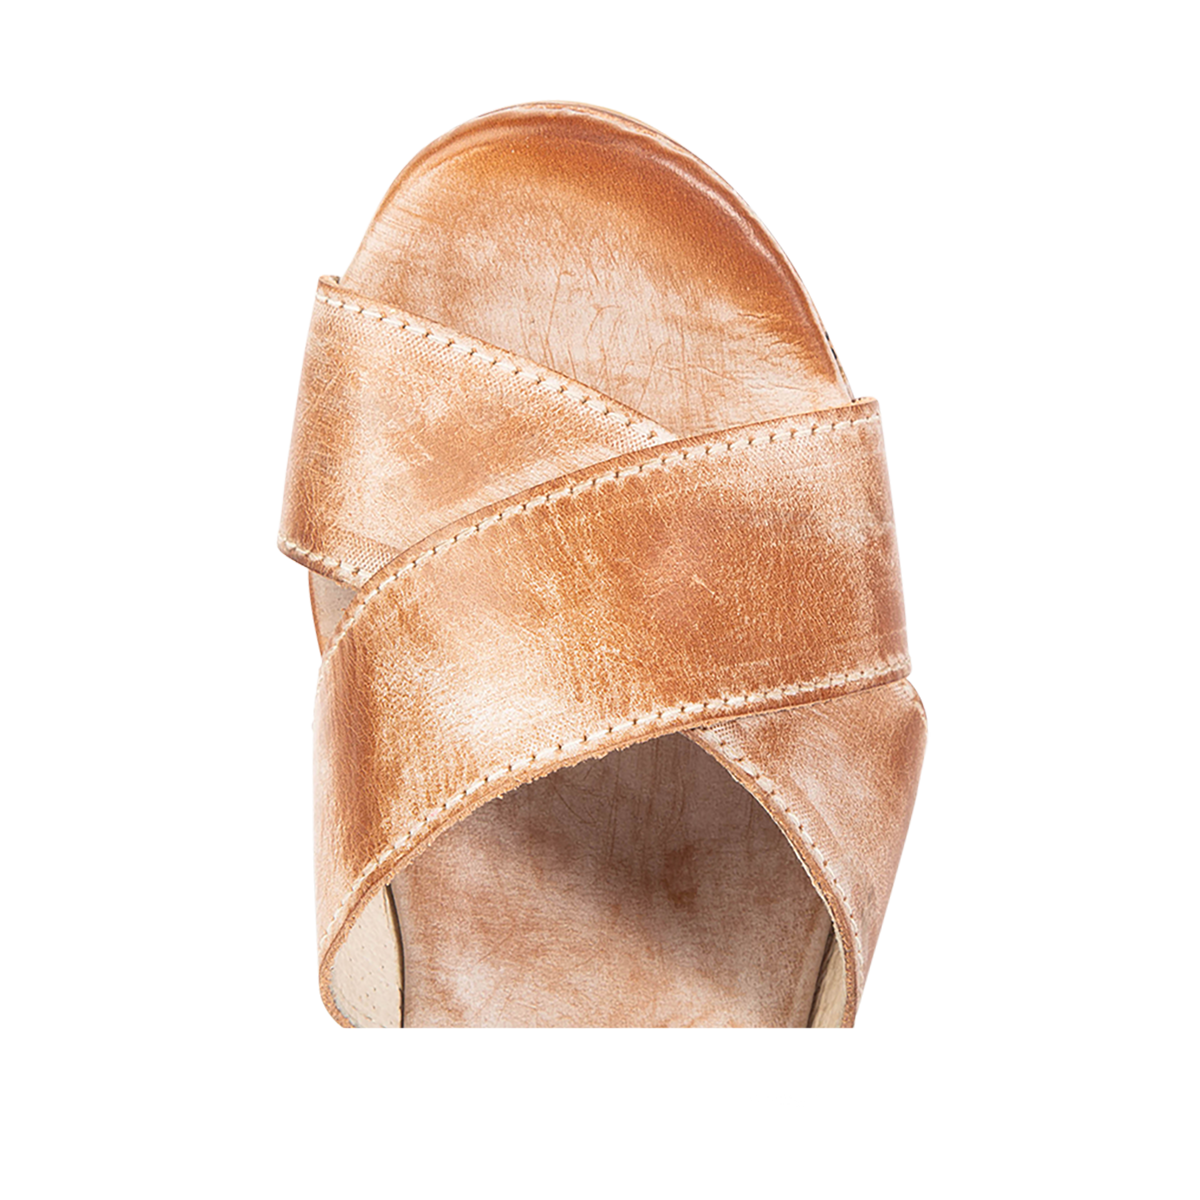 Top view showing cross-over straps on FREEBIRD women's Larae taupe wedge sandal with platform heel and an adjustable ankle strap